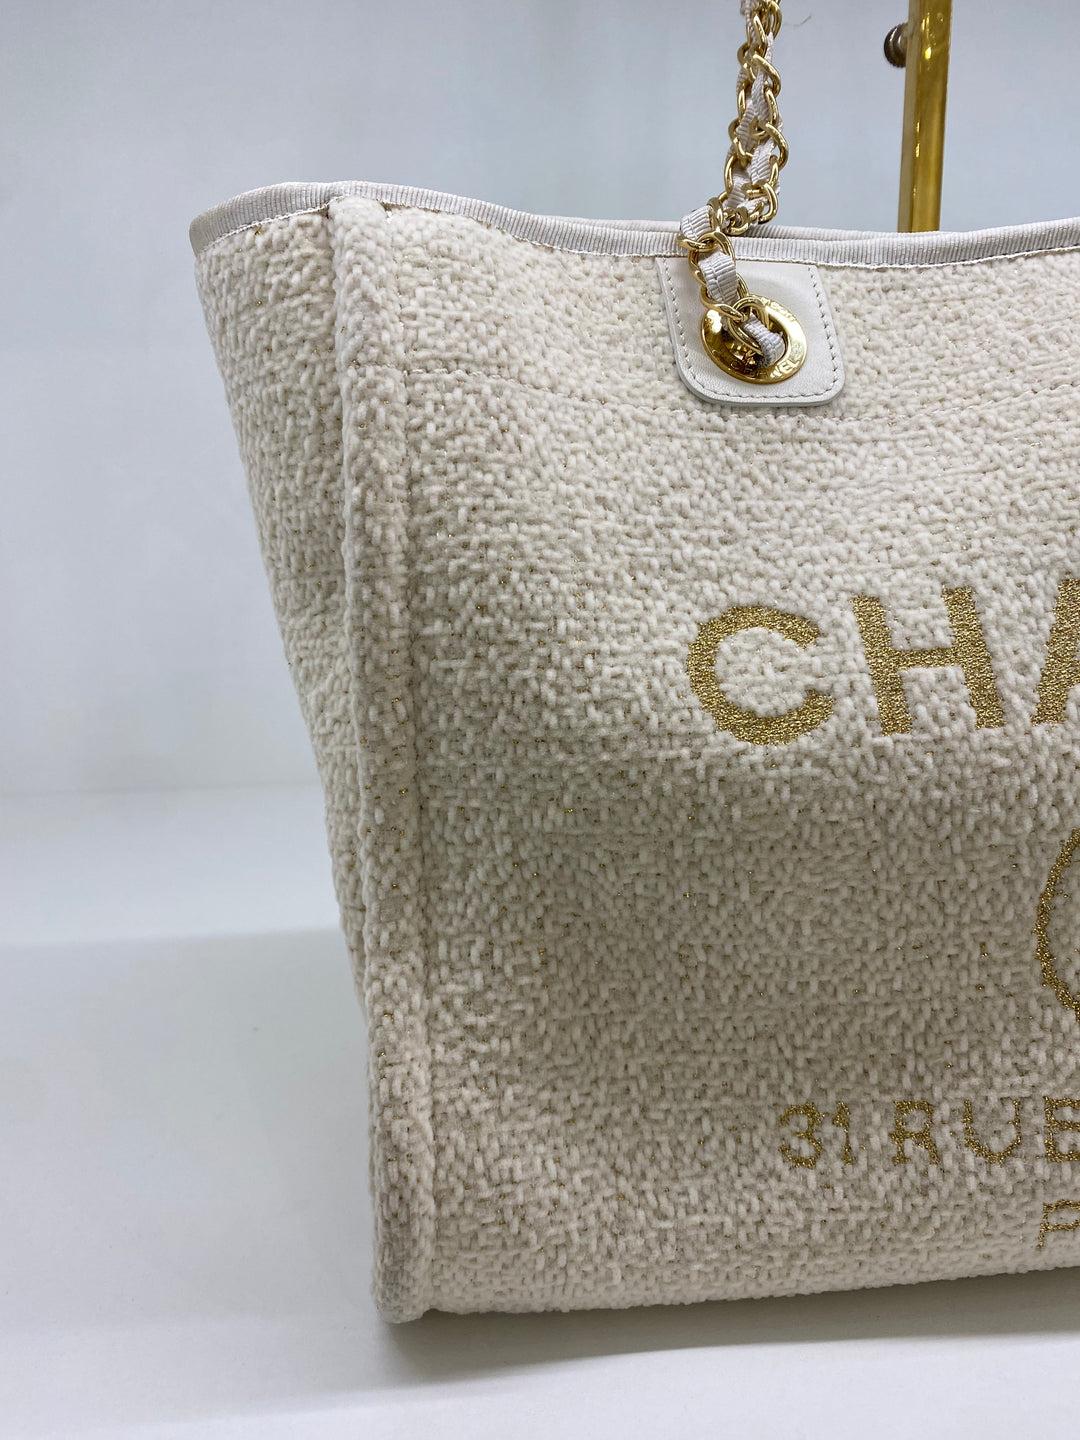 Chanel Deauville Beige Boucle GHW In Excellent Condition For Sale In Double Bay, AU